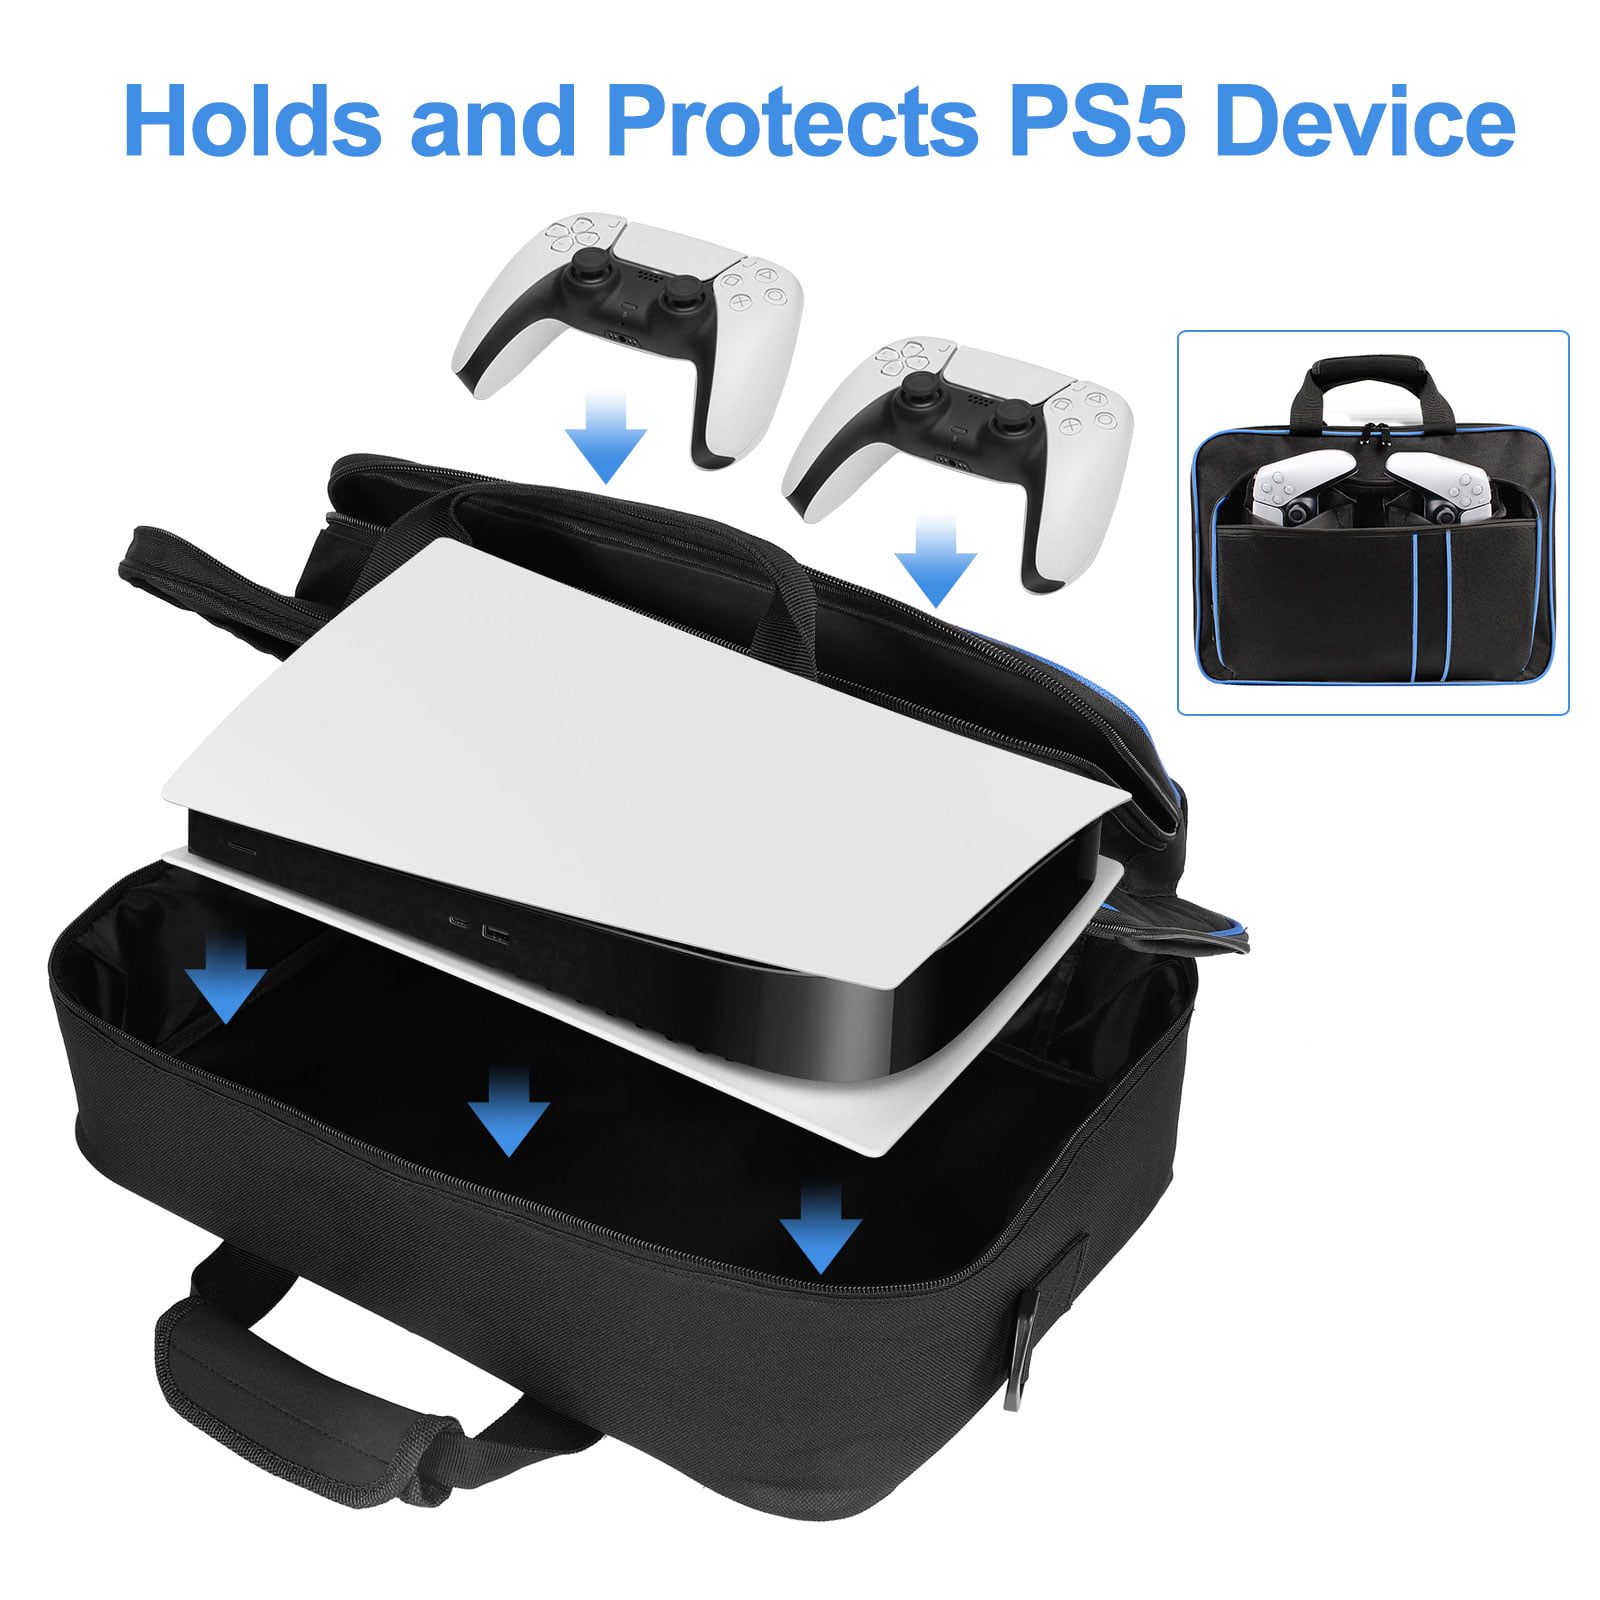 BTOPCASE Hard EVA Protective Carrying Storage Cover Case for Sony Pulse 3D Wireless Headset Sony PS5 Headset Black with Slot